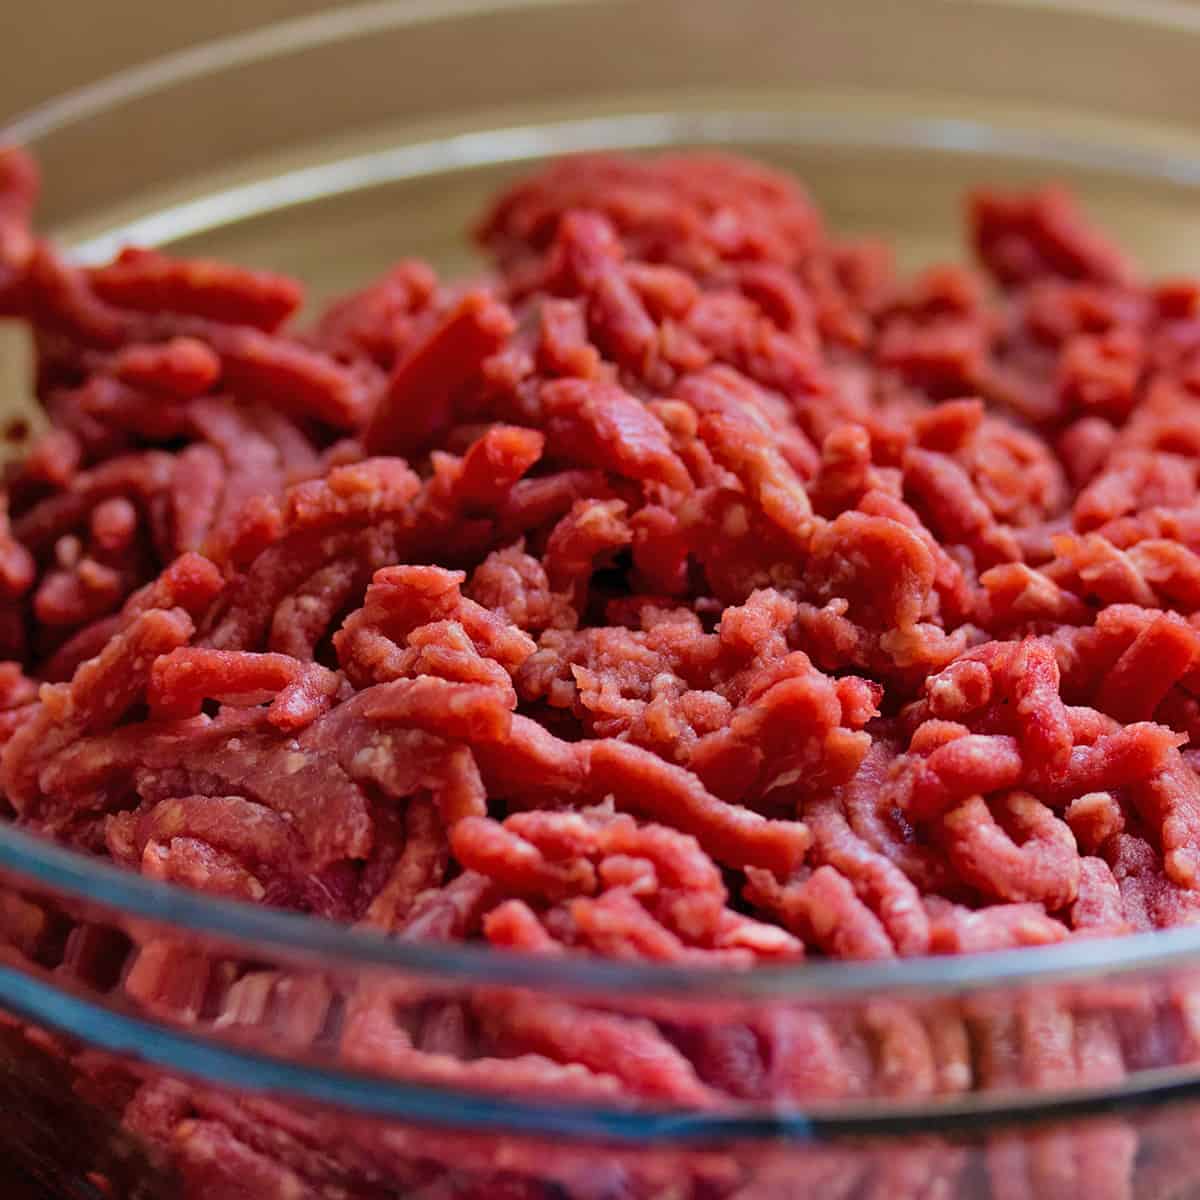 How to Boil Ground Beef for the Freezer